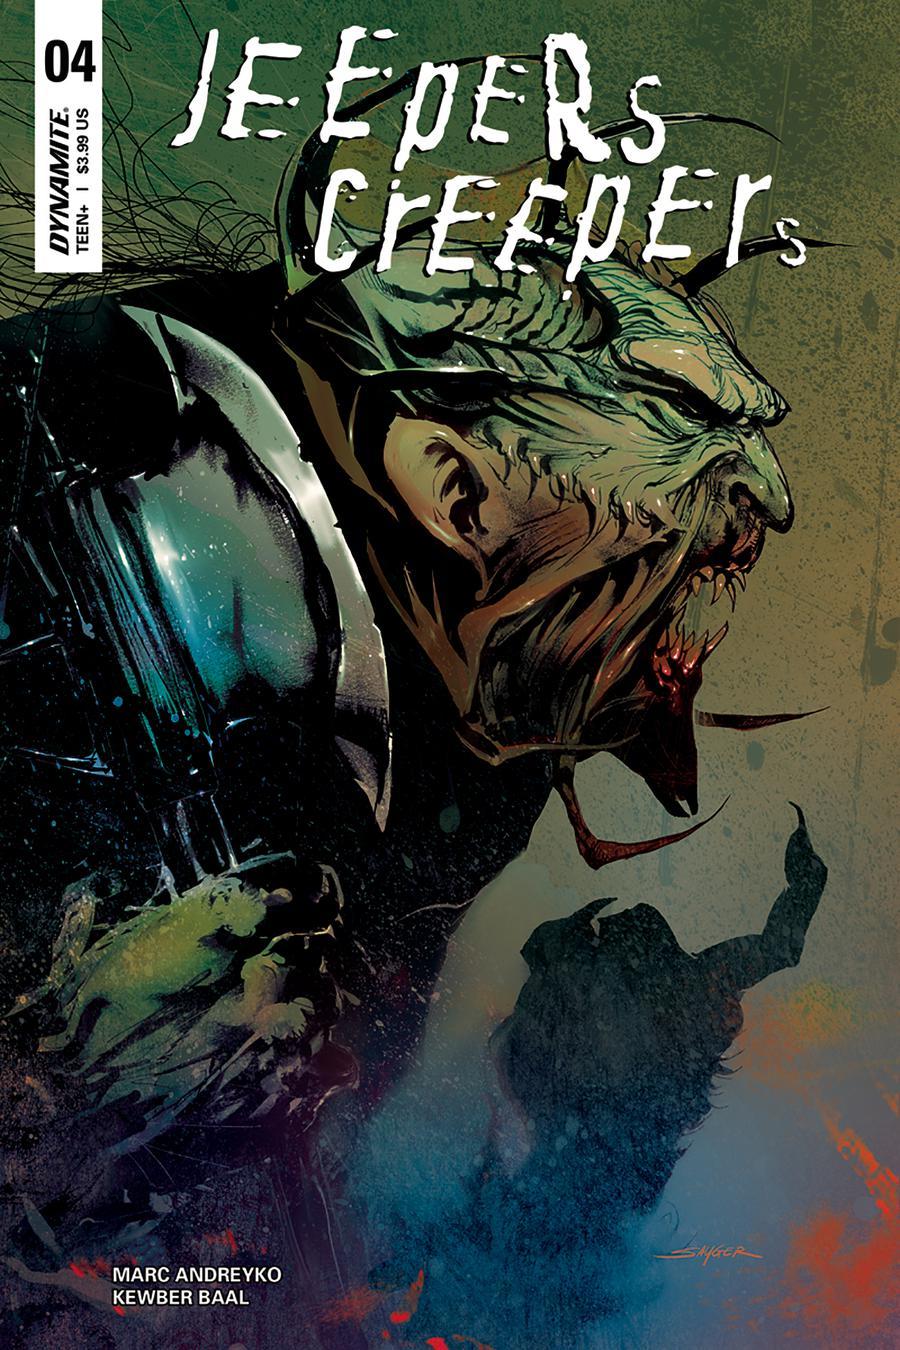 Jeepers Creepers Vol. 1 #4